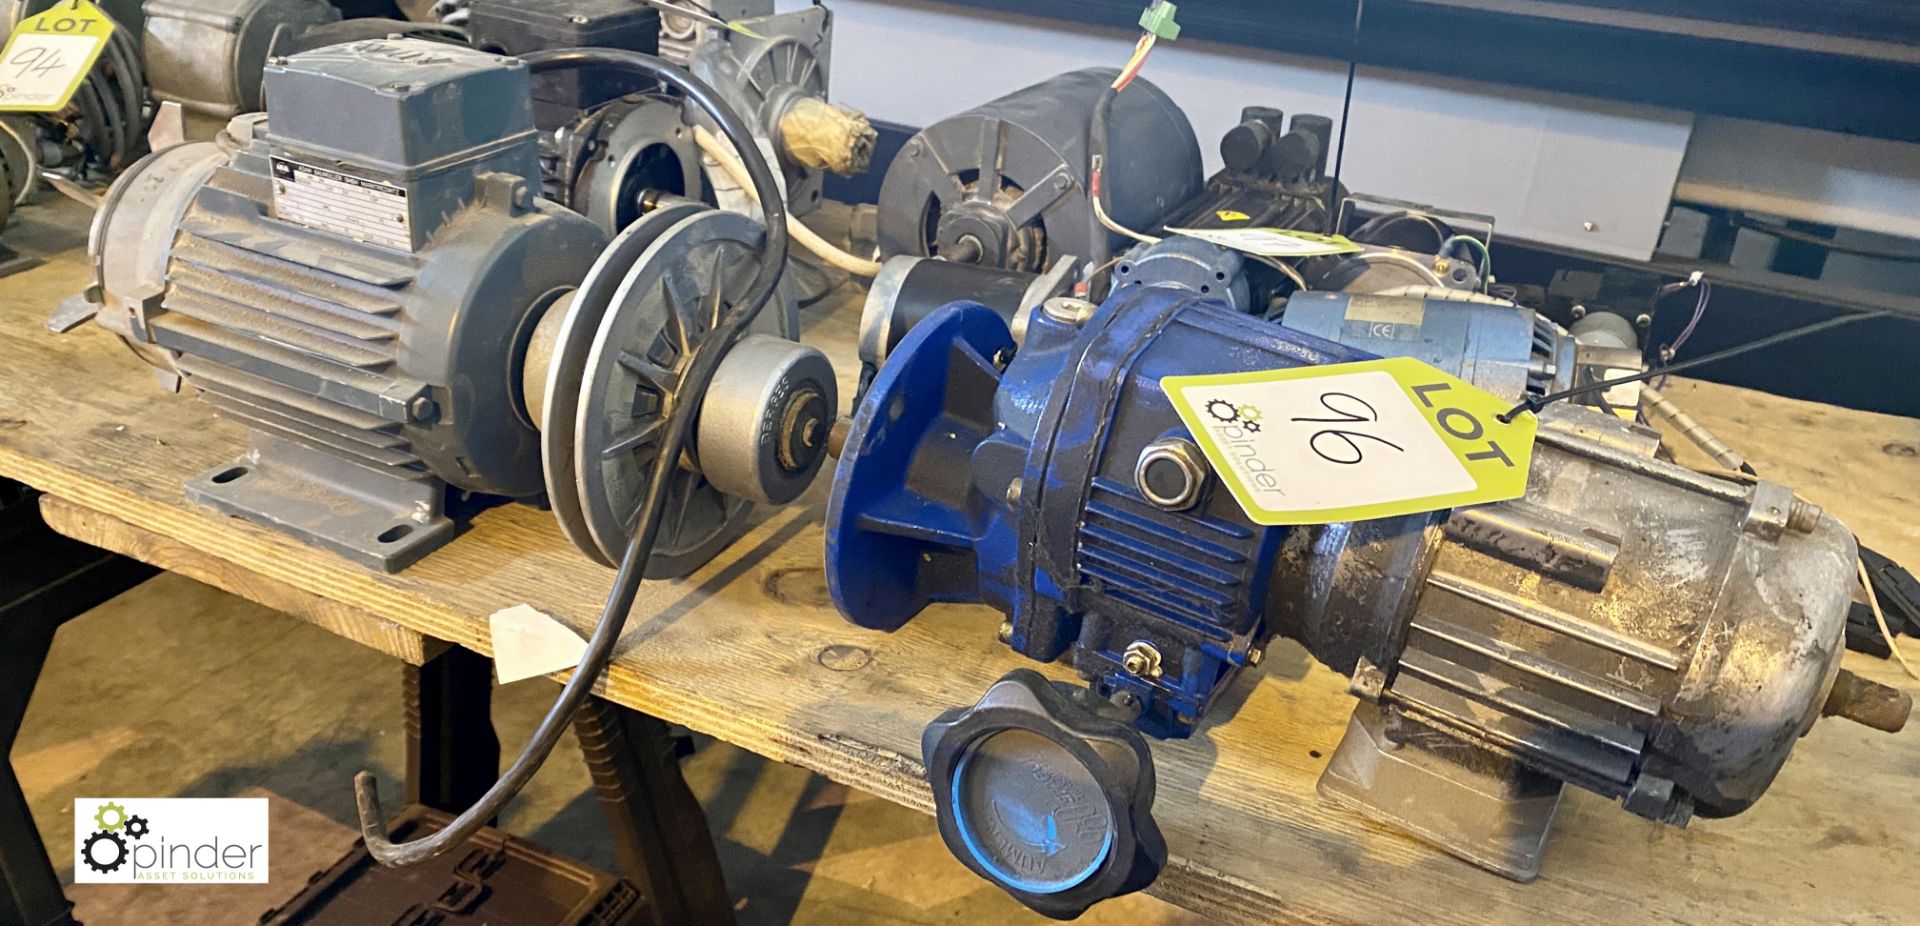 Geared Motor and Electric Motor (purchaser to remove lot from building) (LOCATION: Wakefield)